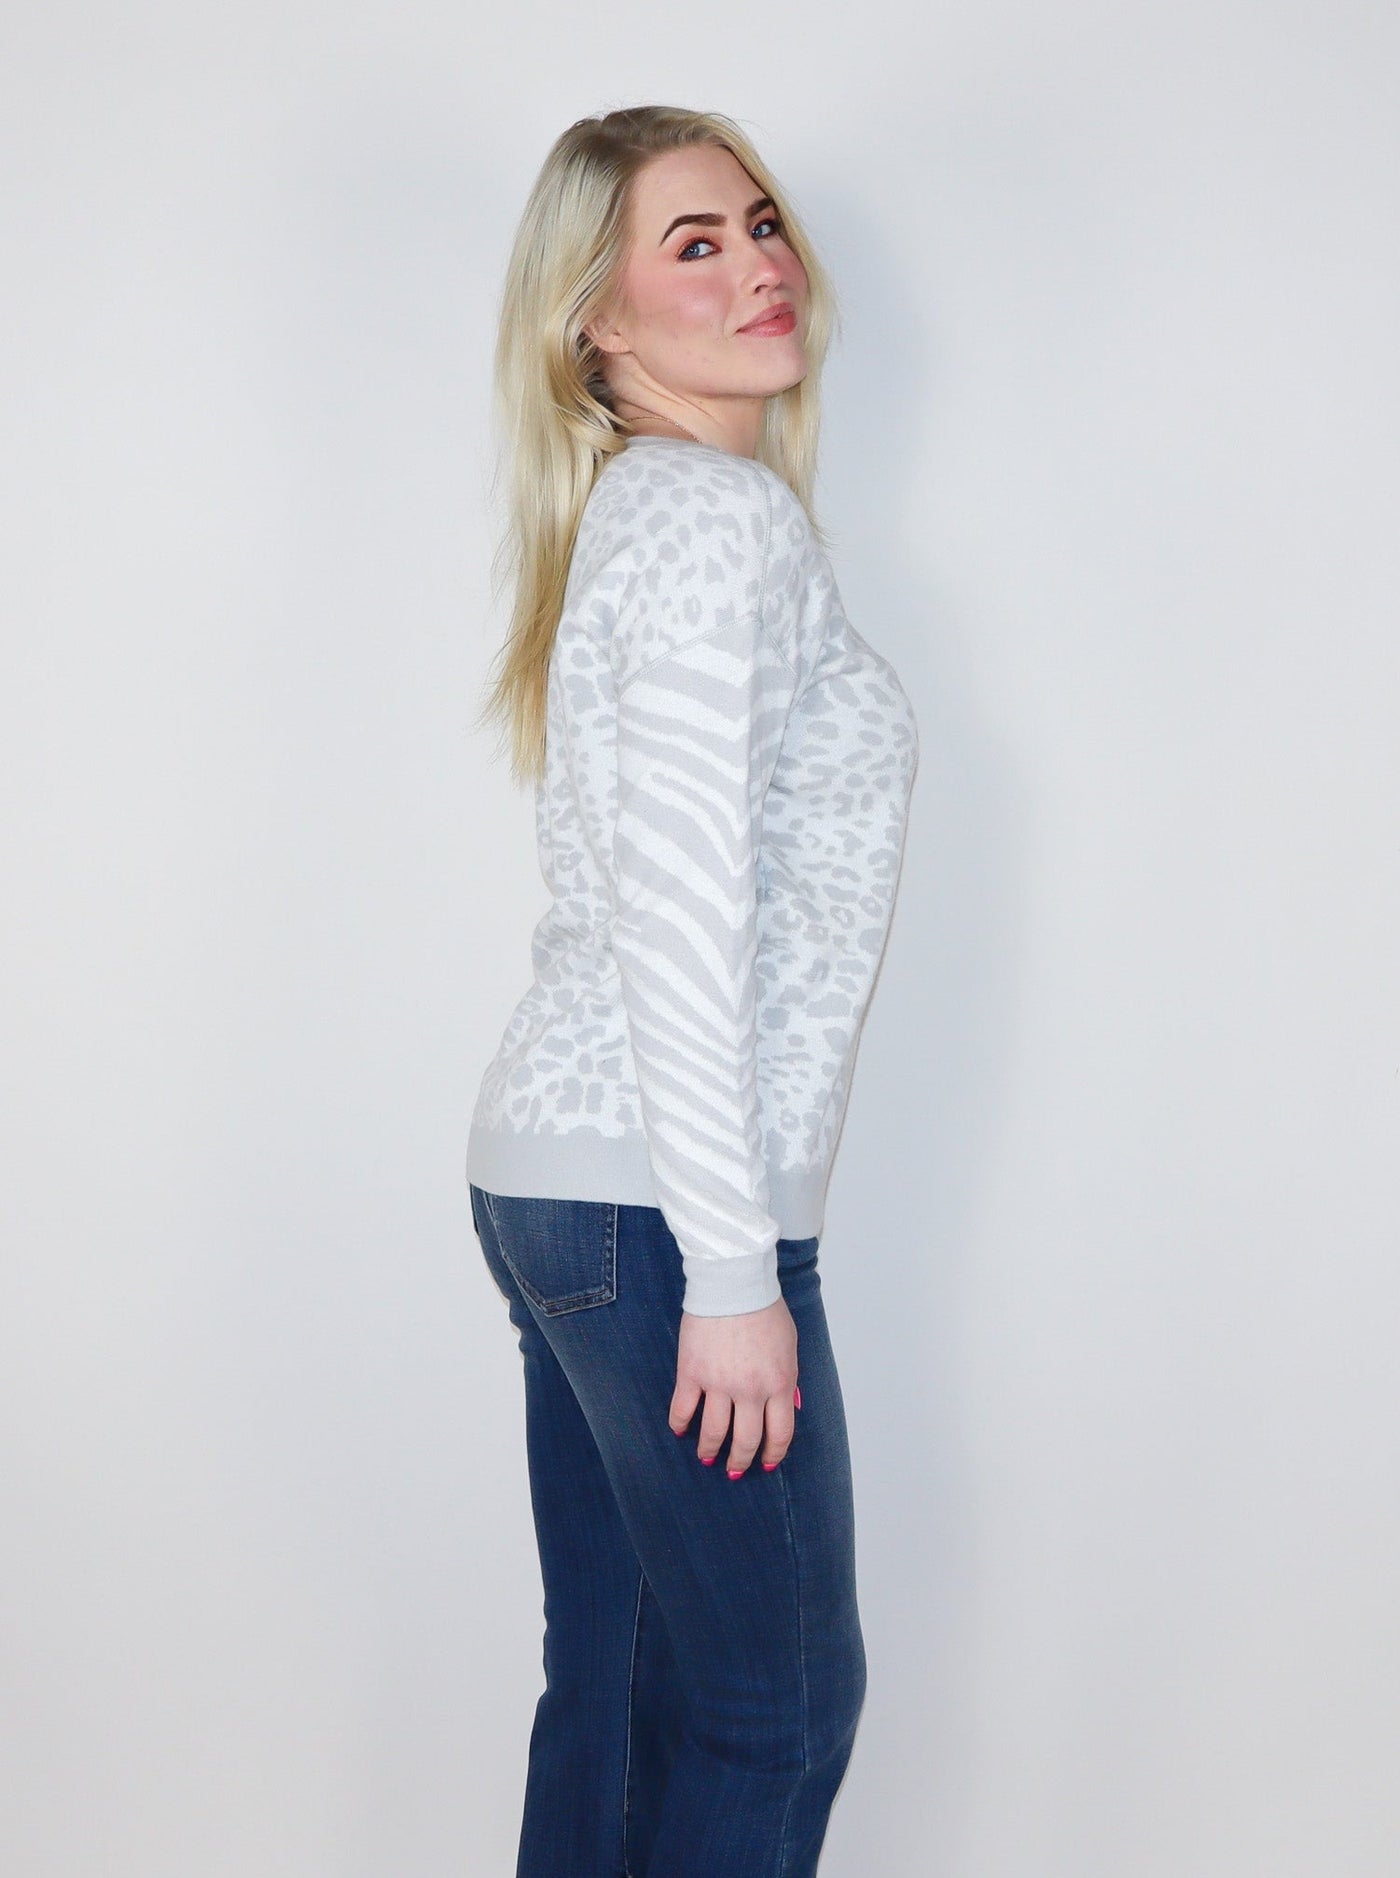 Model is wearing a white and light grey cheetah and zebra print pullover. Pullover is paired with blue jeans.